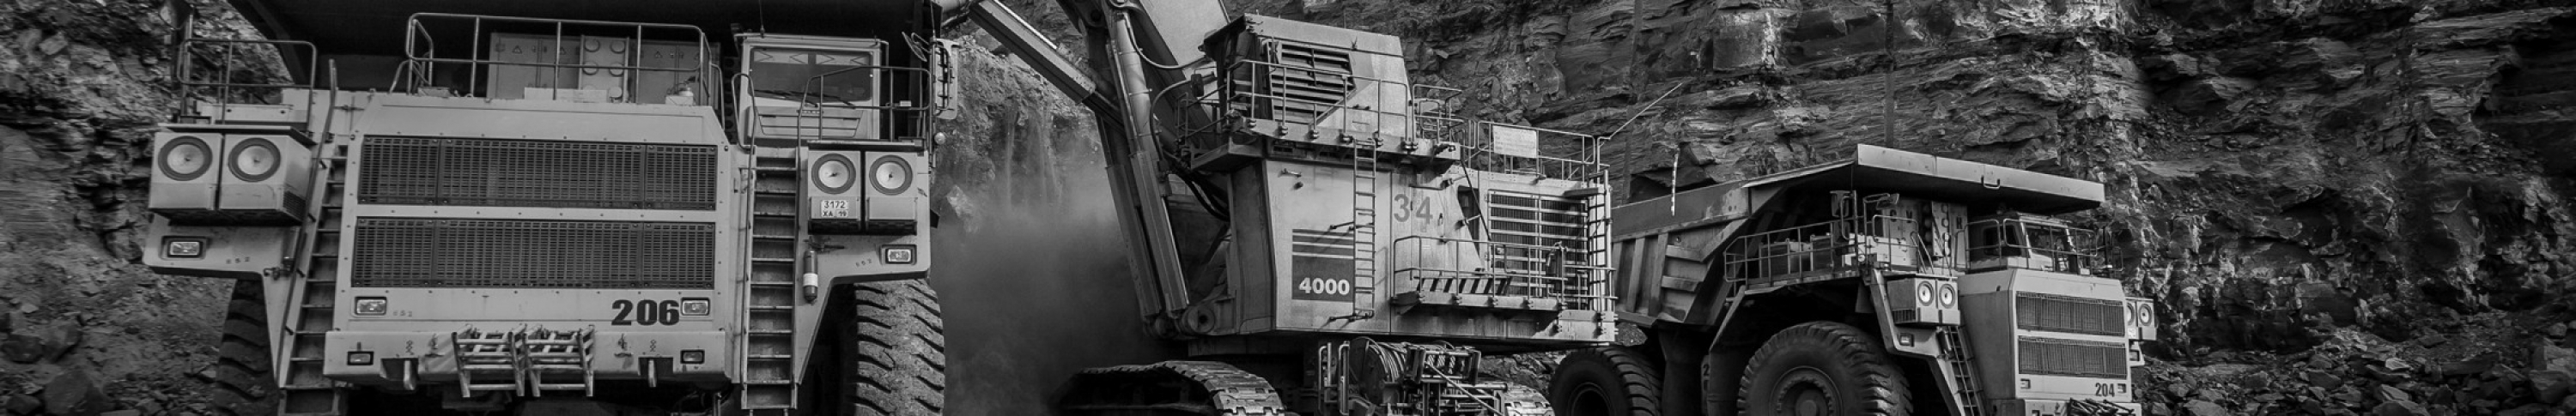 Sears Mining Products. Picture of three large mining machines.